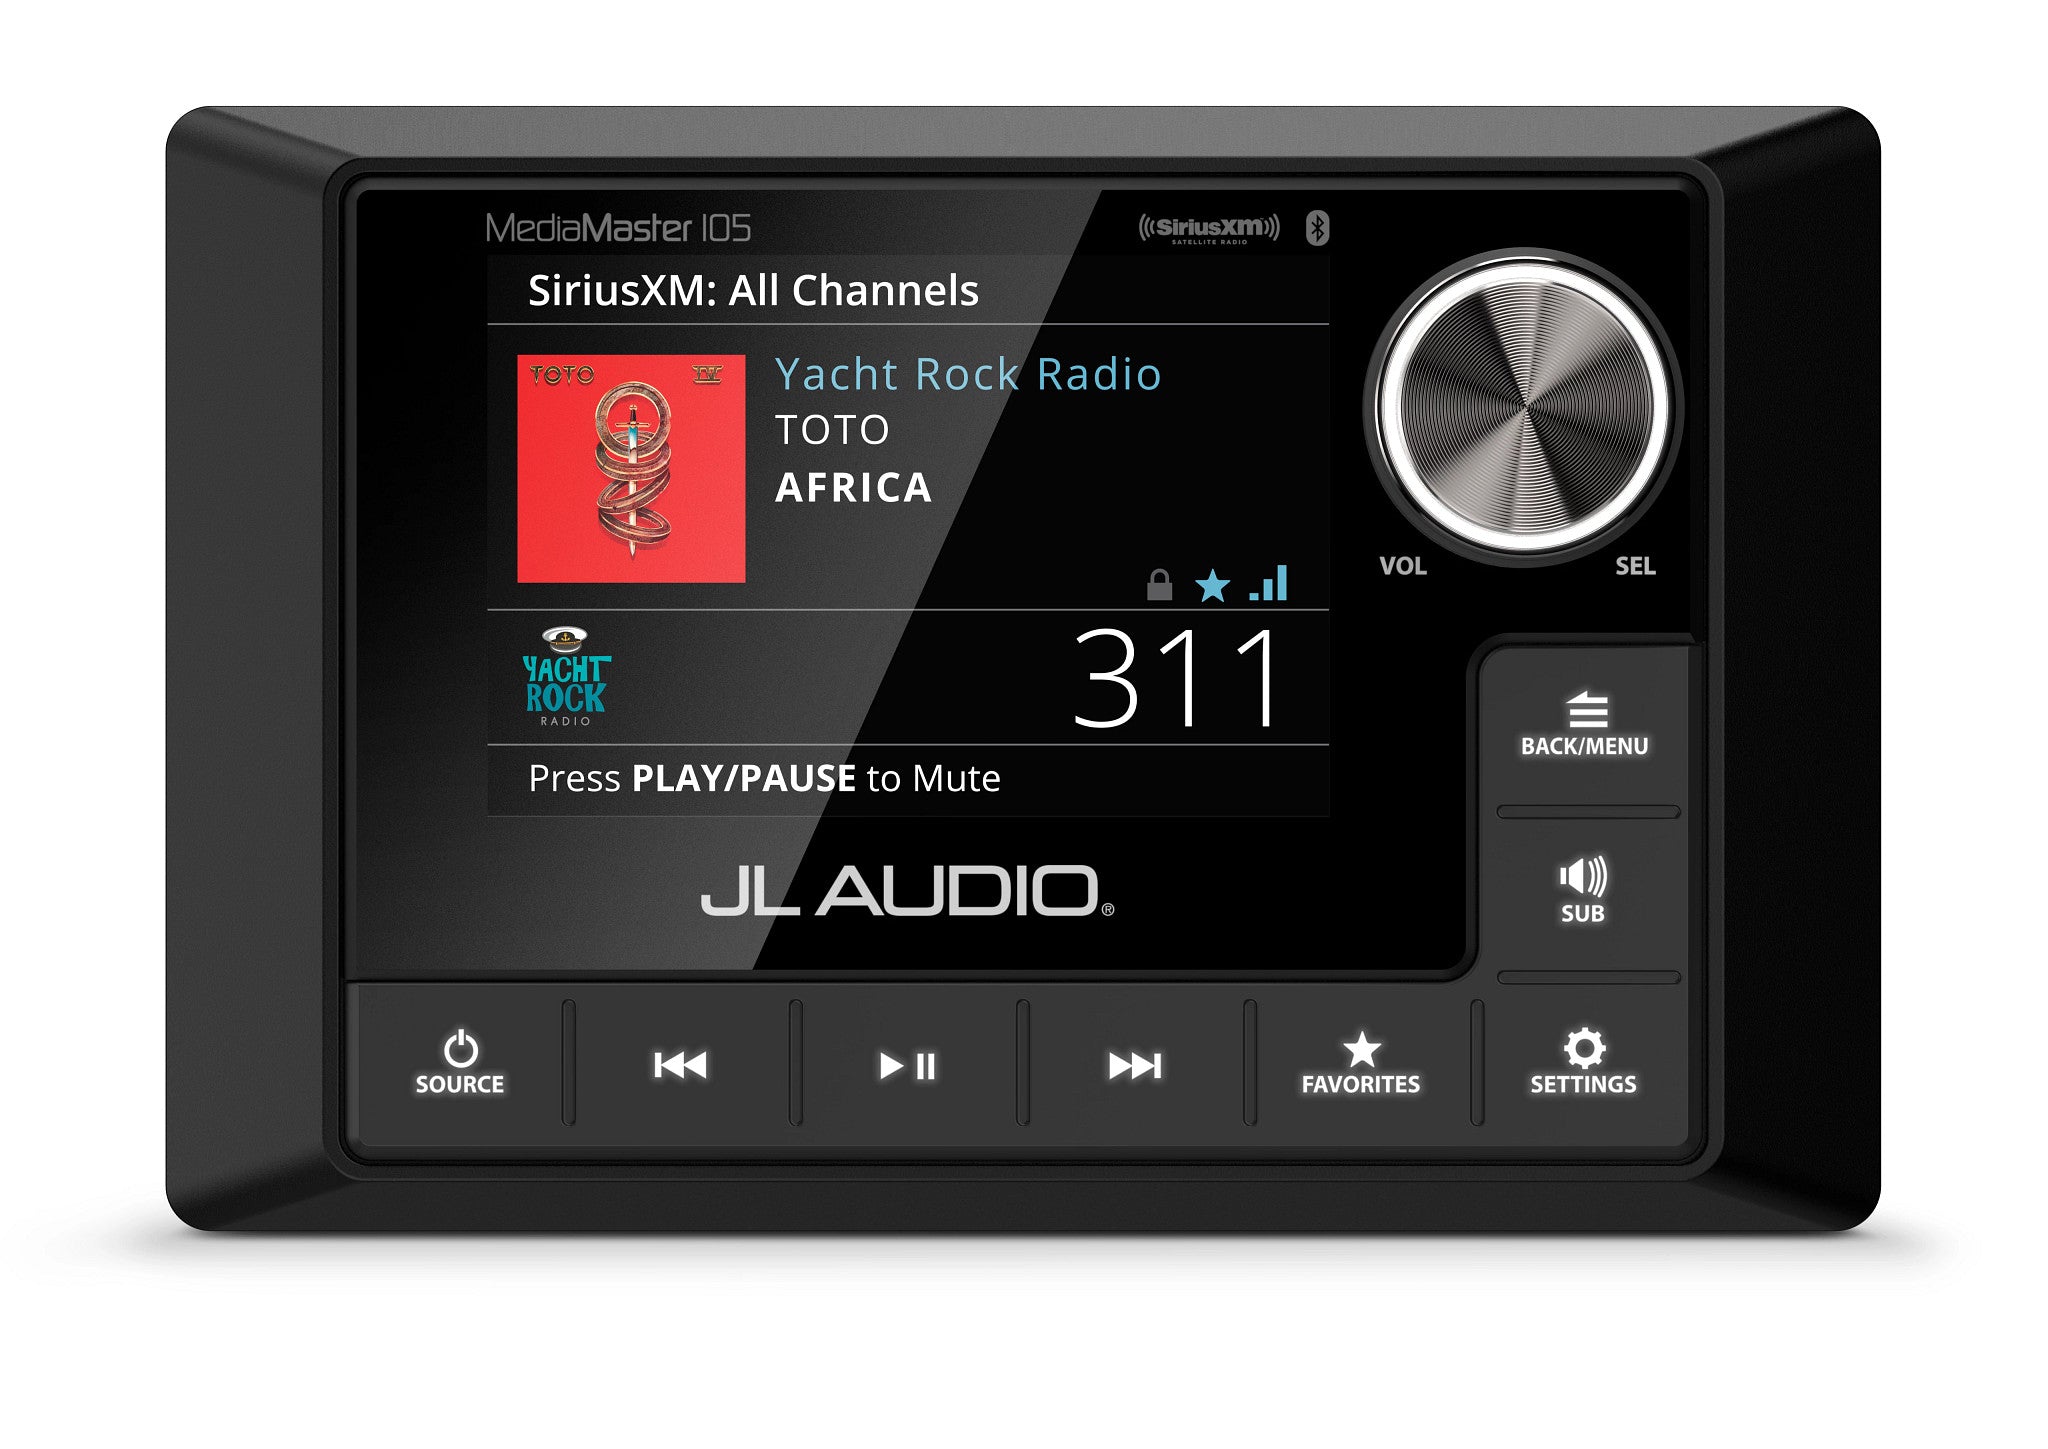 MediaMaster MM105 Front Overhead with SiriusXM tuned to channel 311 playing Africa by Toto